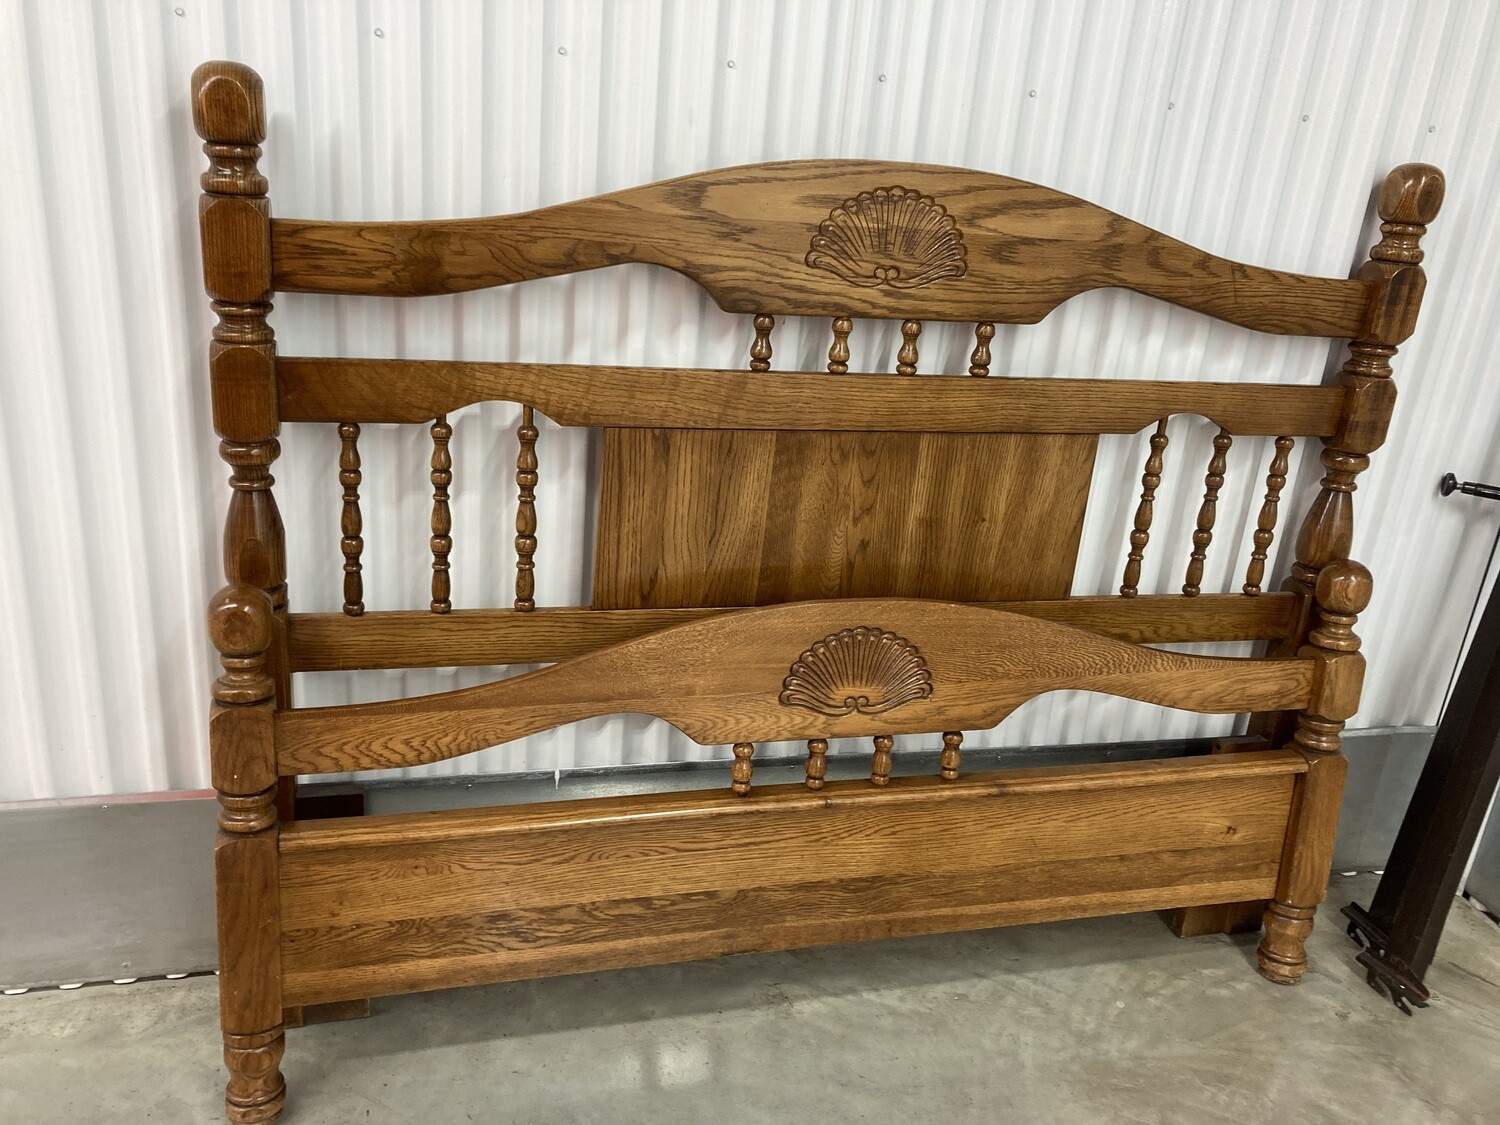 Full / Queen Oak Bedframe, beautiful! #2119 - moved to family service